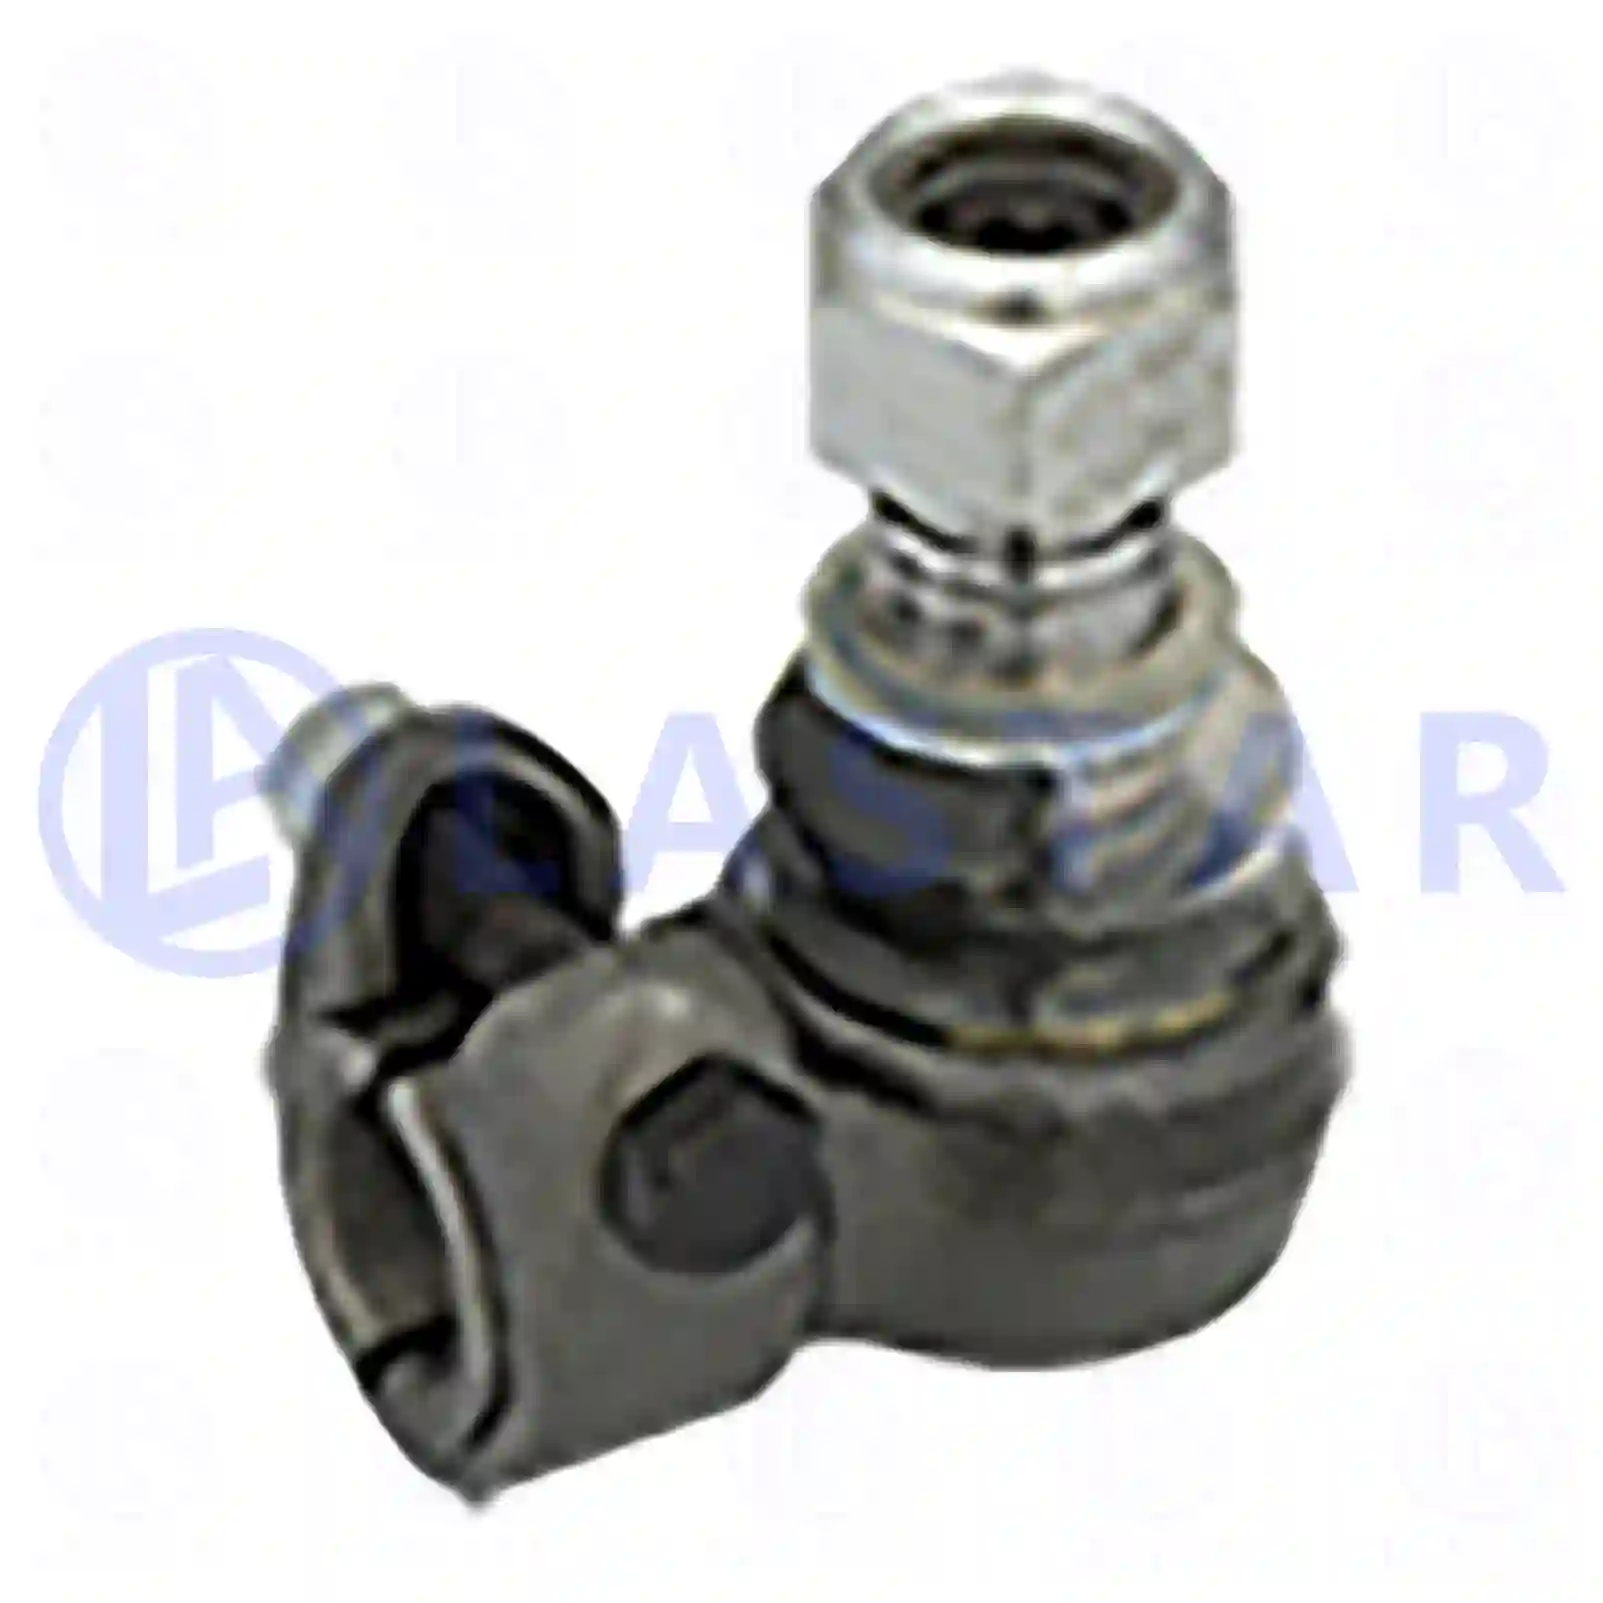 Ball joint, right hand thread, 77705116, 1271126, 42530447, 42538048, 81953016268, 82953016018, 82953016019, 281953016268, 3090291, 3099128, ZG40379-0008 ||  77705116 Lastar Spare Part | Truck Spare Parts, Auotomotive Spare Parts Ball joint, right hand thread, 77705116, 1271126, 42530447, 42538048, 81953016268, 82953016018, 82953016019, 281953016268, 3090291, 3099128, ZG40379-0008 ||  77705116 Lastar Spare Part | Truck Spare Parts, Auotomotive Spare Parts